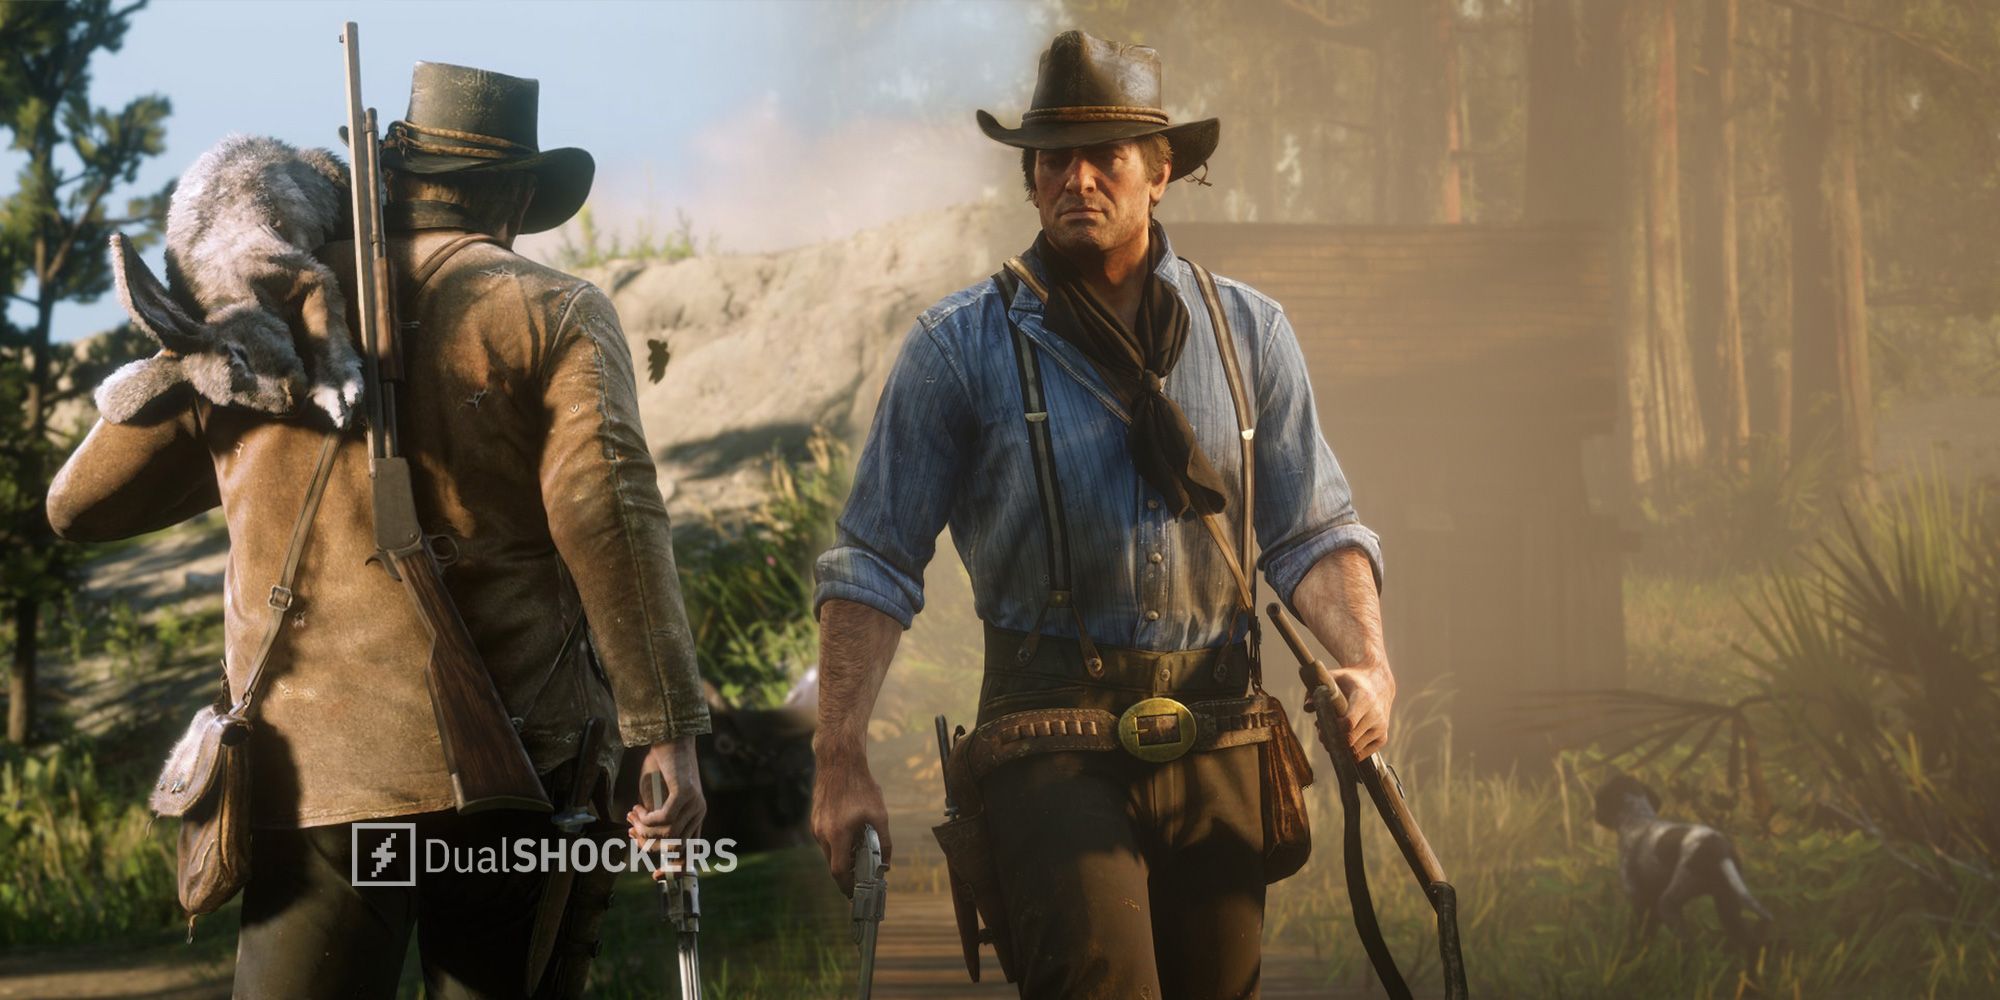 Red Dead Redemption 2 is the most boring video game ever made